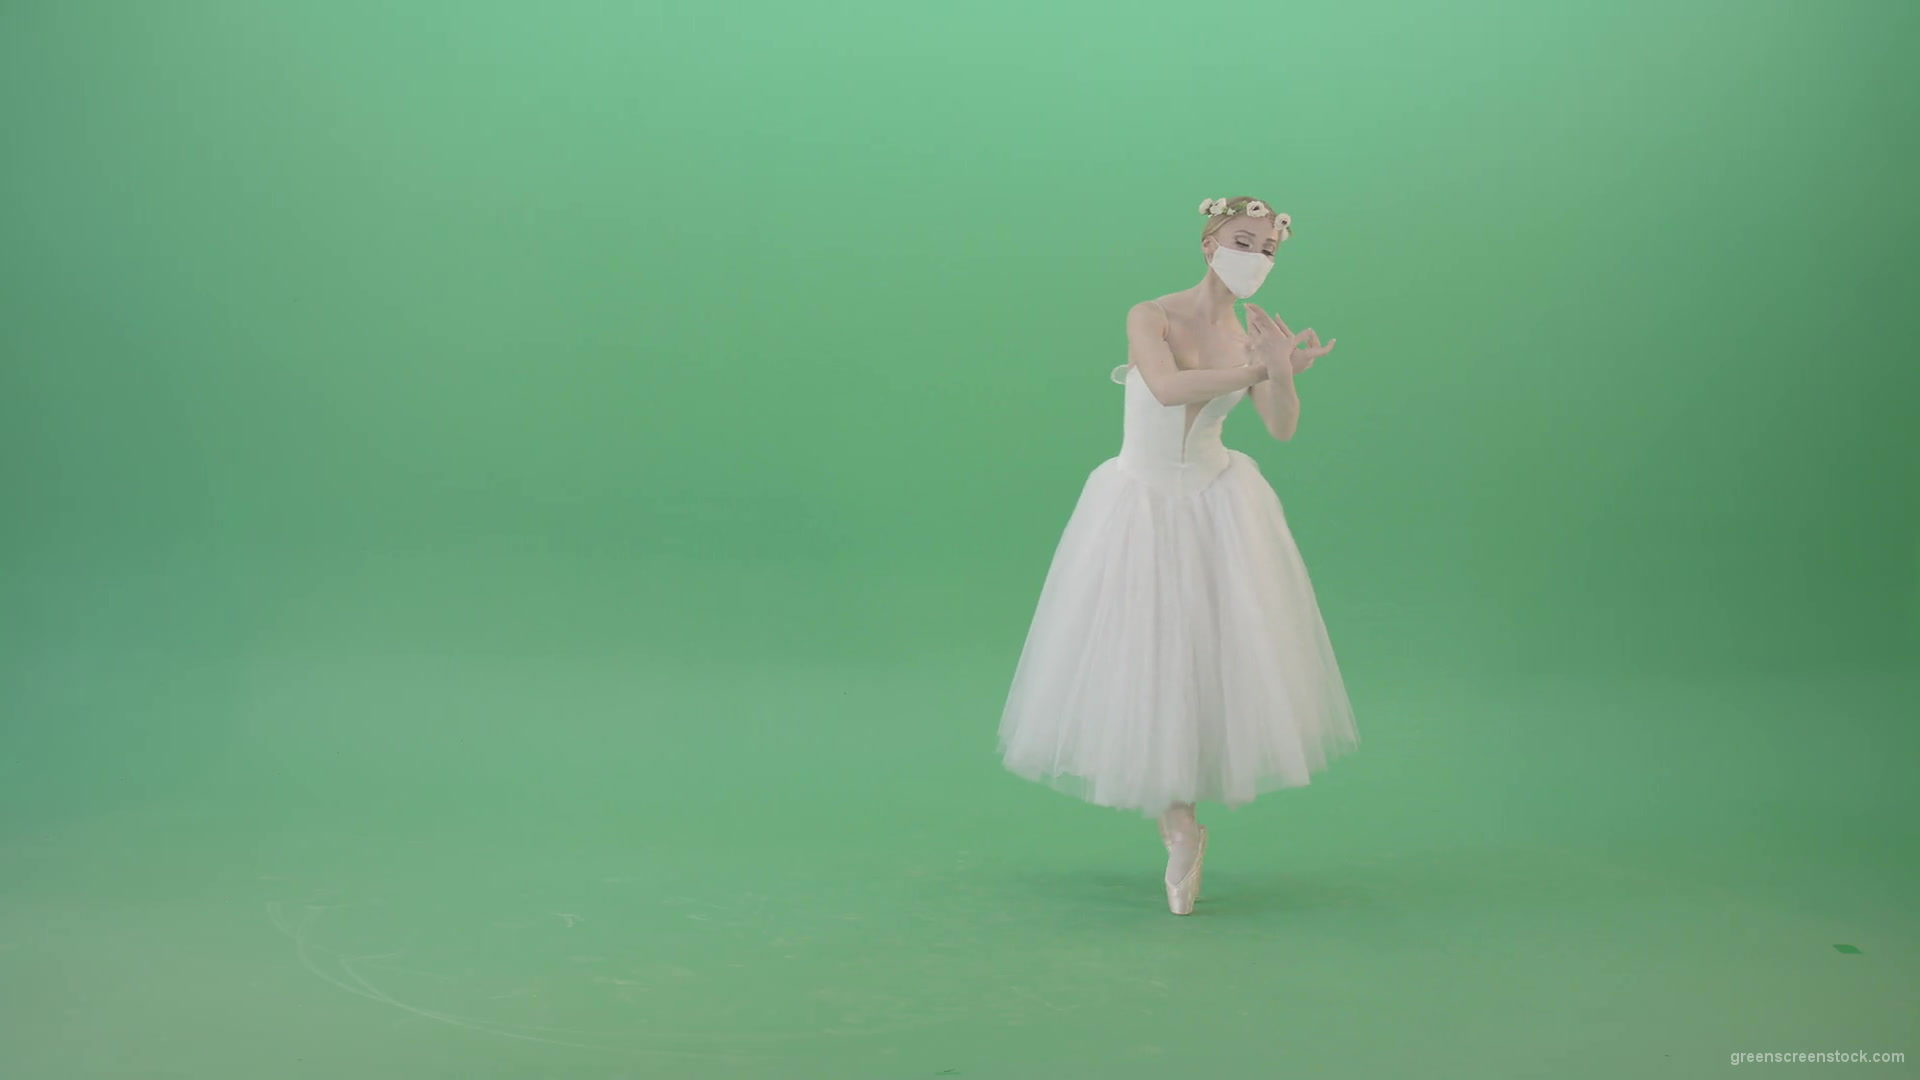 Ballet-Dance-young-woman-welcome-Corona-Virus-dancing-in-mask-isolated-on-green-screen-4K-Video-Footage-1920_002 Green Screen Stock